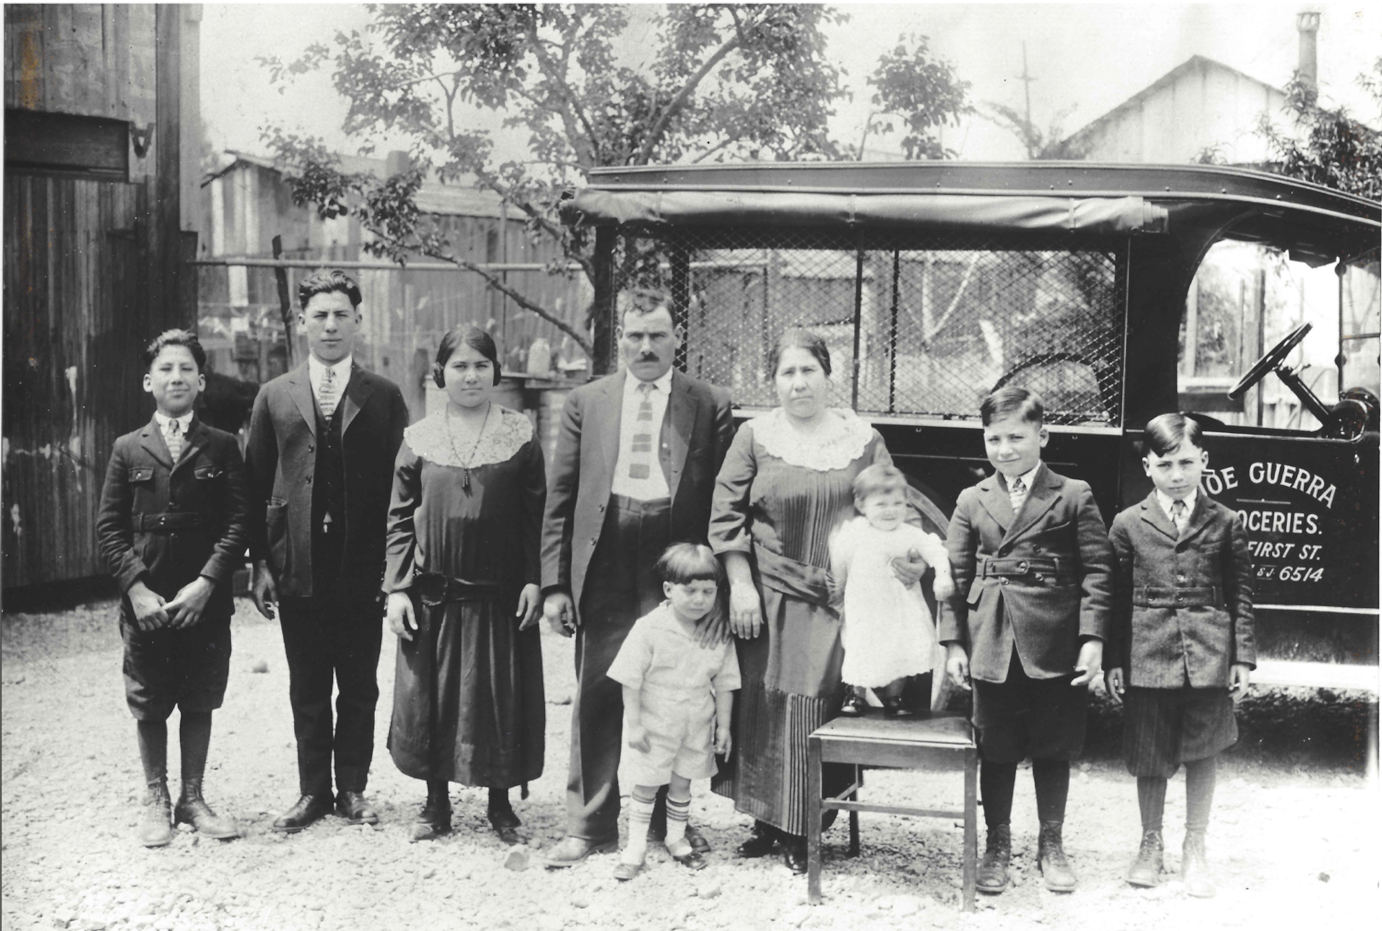 Historical photo of the Guerra family posing outside with groceries vehicle in the back